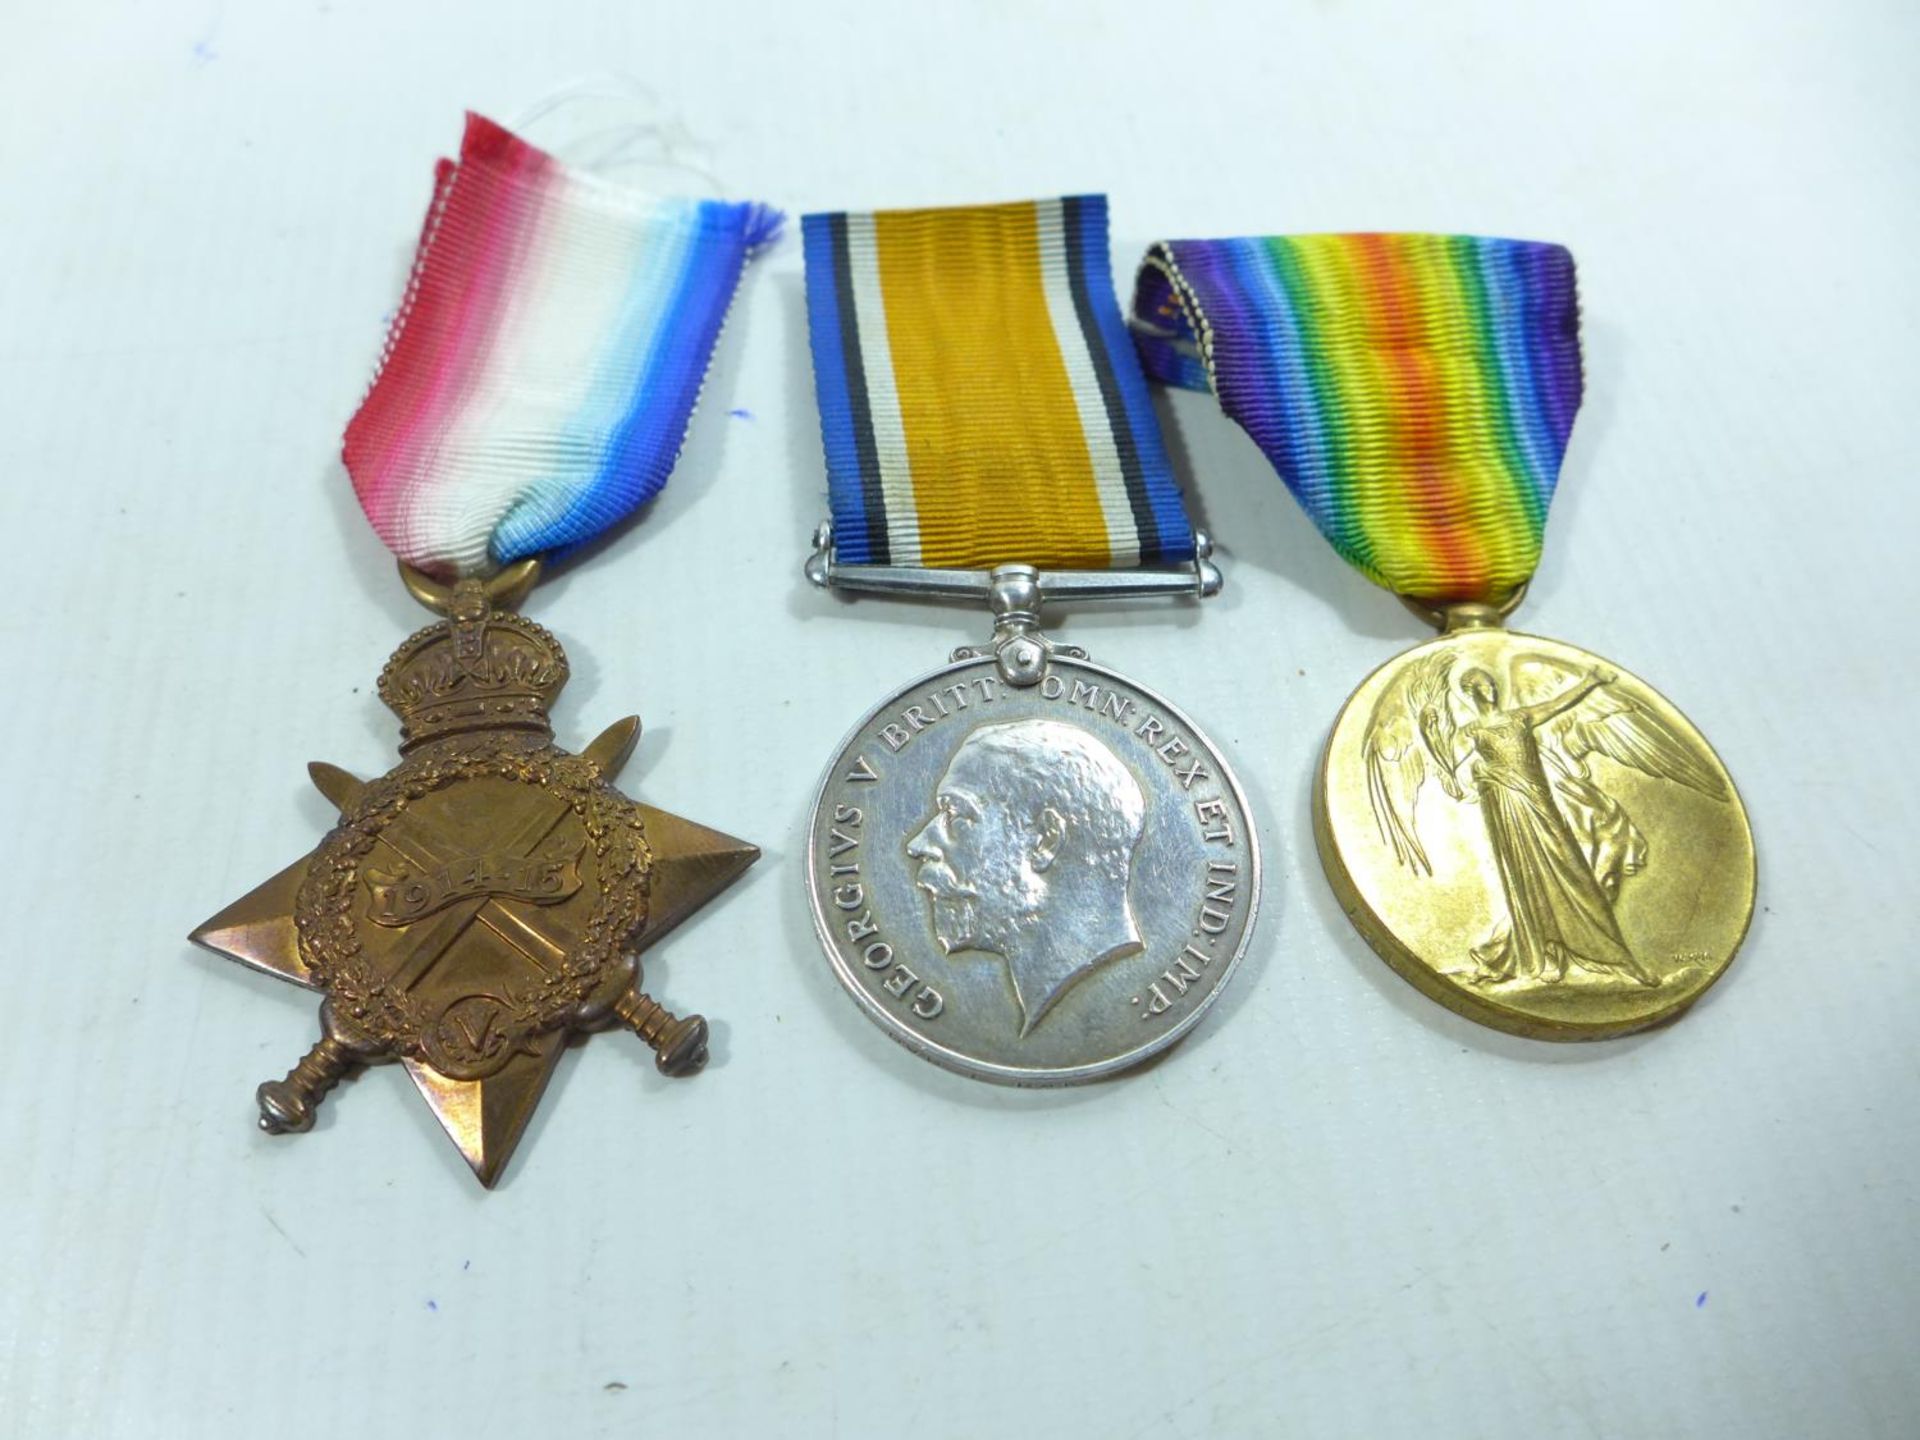 A WORLD WAR I TRIO MEDAL GROUP AWARDED TO 5-866 DRIVER E RAWSON OF THE ARMY SERVICE CORPS